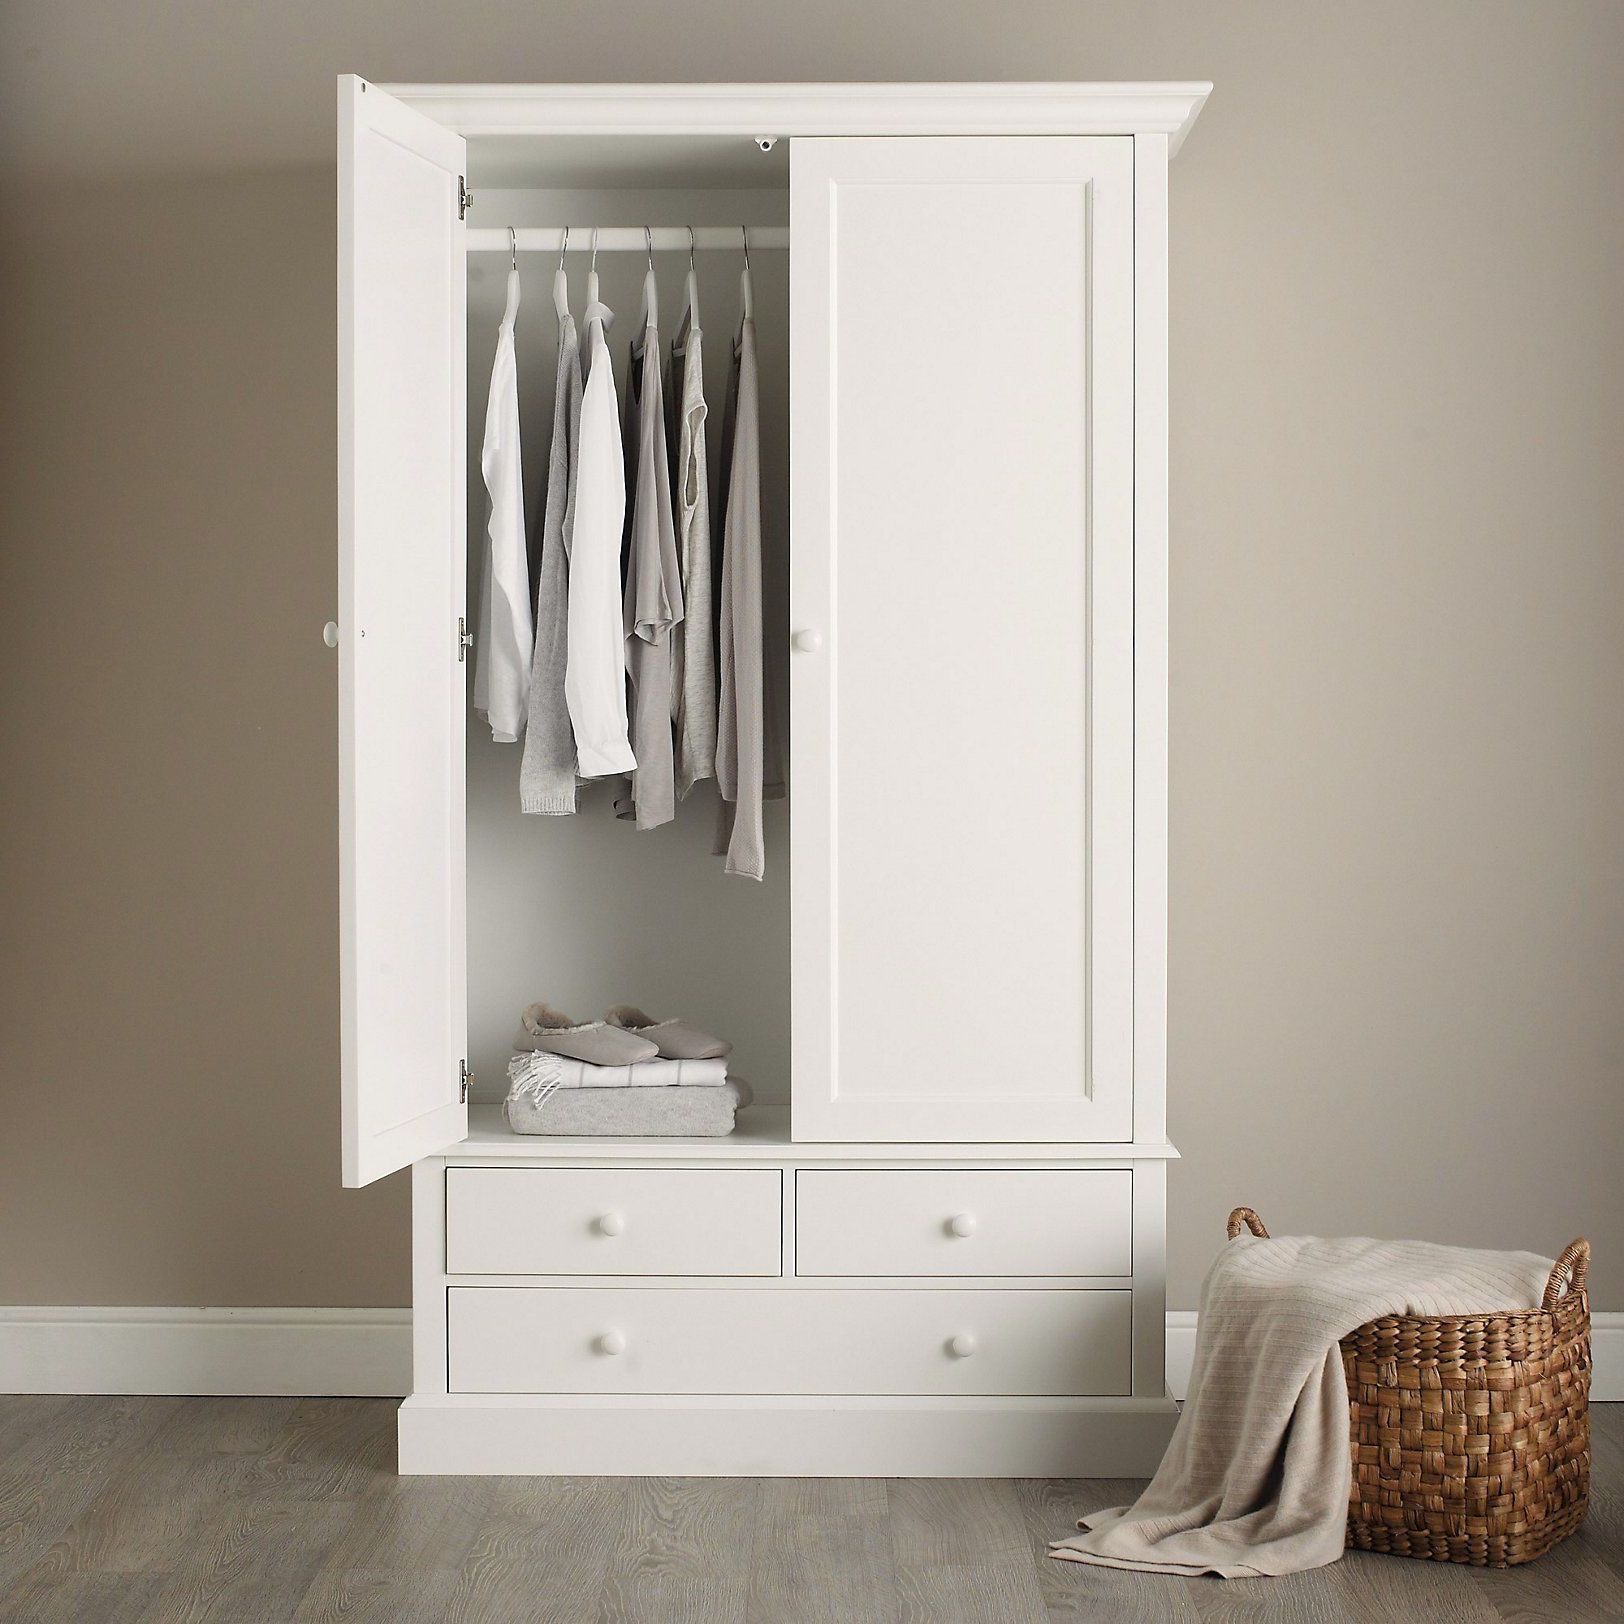 Classic Large Wardrobe | Bedroom Furniture | The White Company | Classic  Bedroom Furniture, White Wooden Wardrobe, Large Wardrobes Intended For White Wood Wardrobes With Drawers (View 7 of 20)